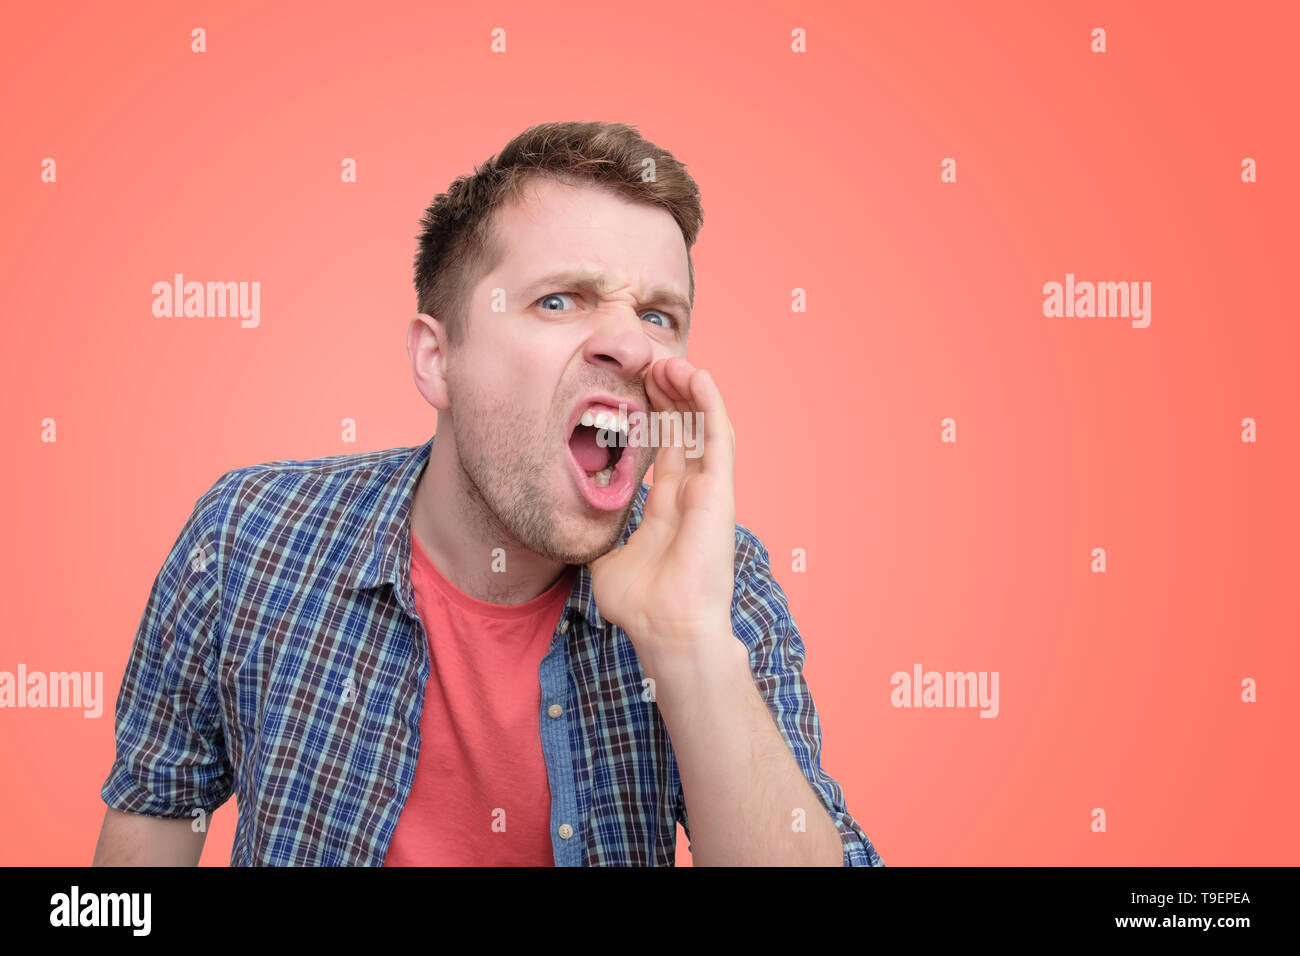 Young european man shouting on colored wall. Stock Photo